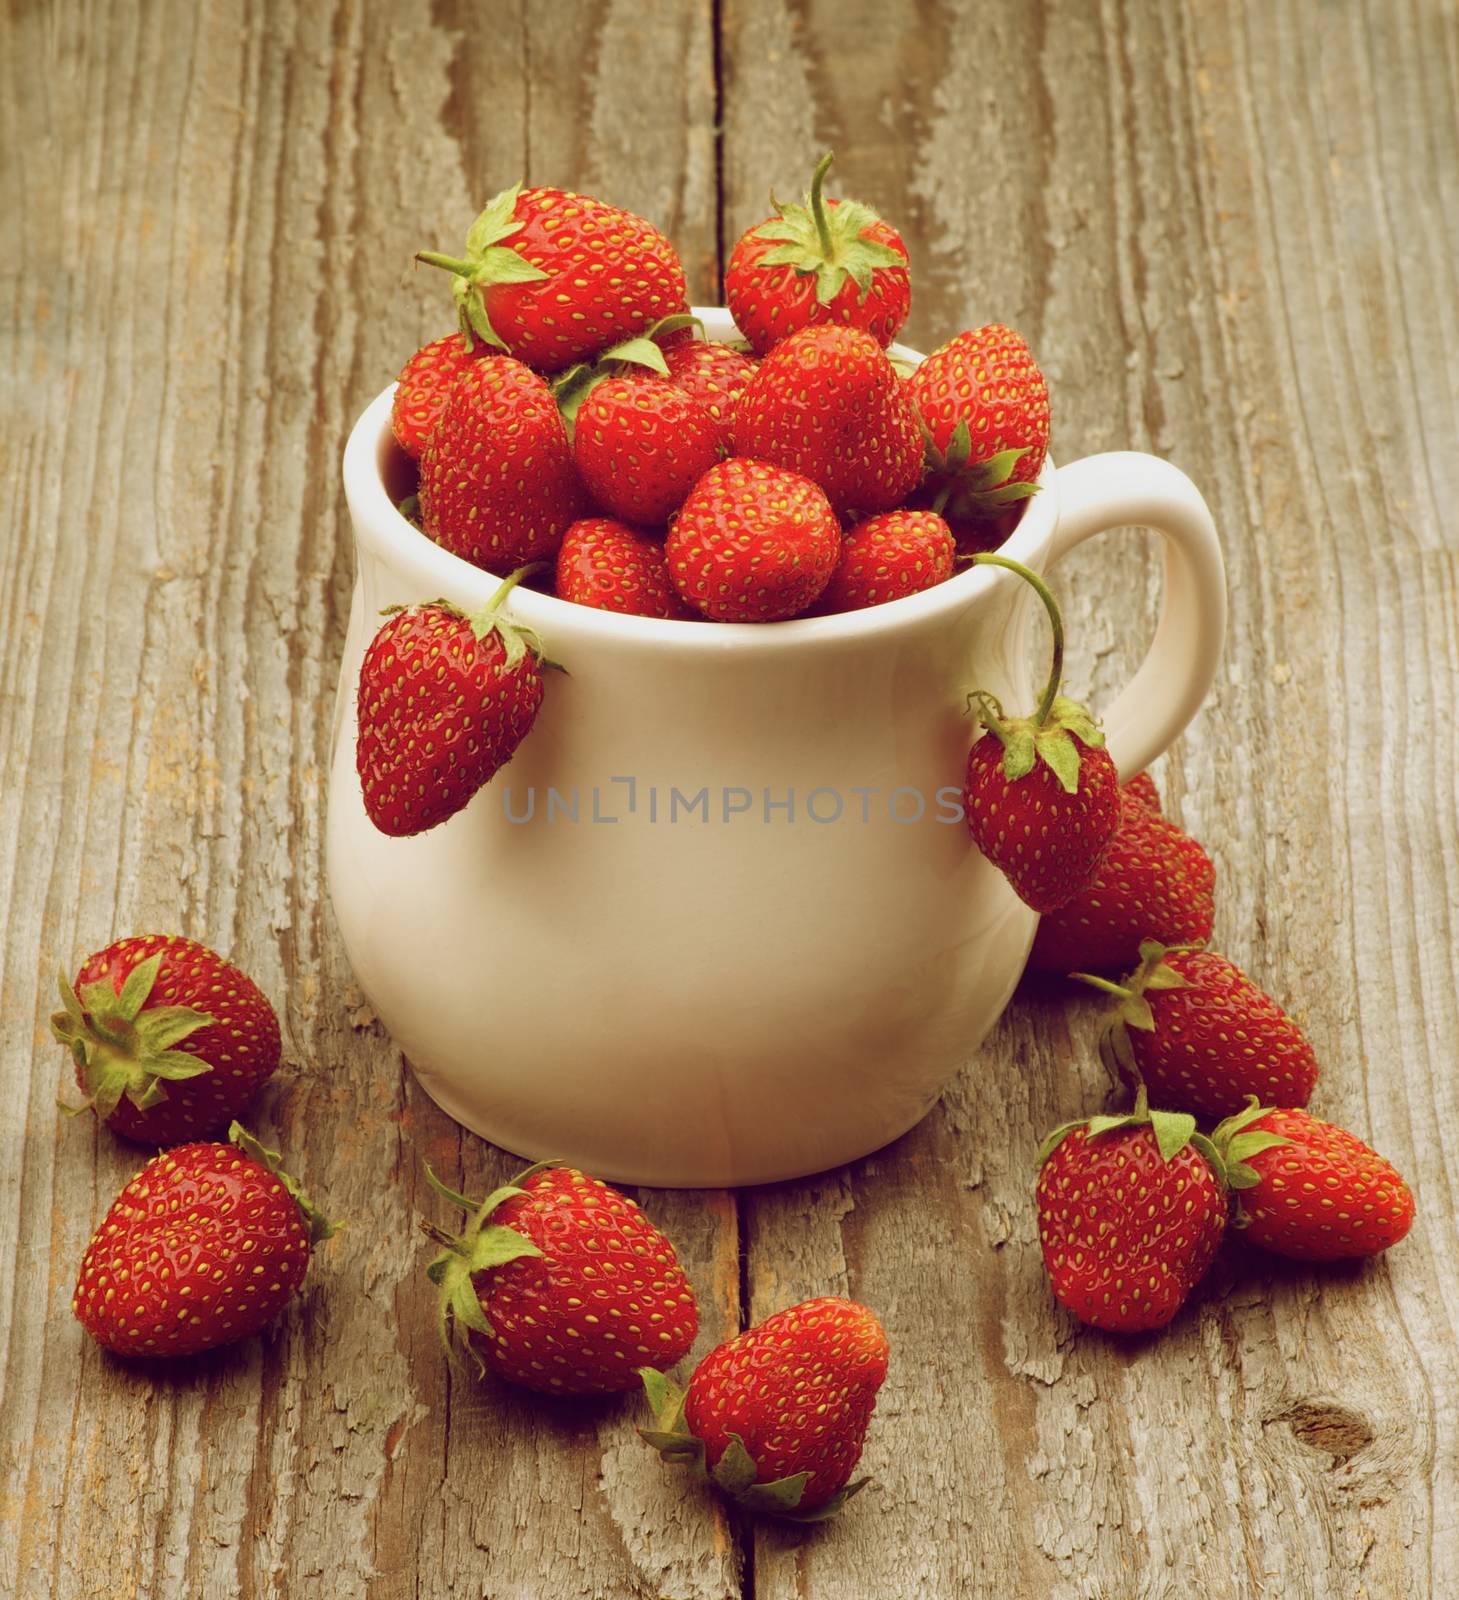 Small Ripe Forest Strawberries in Tea Cup isolated on Rustic Wooden background. Retro Styled